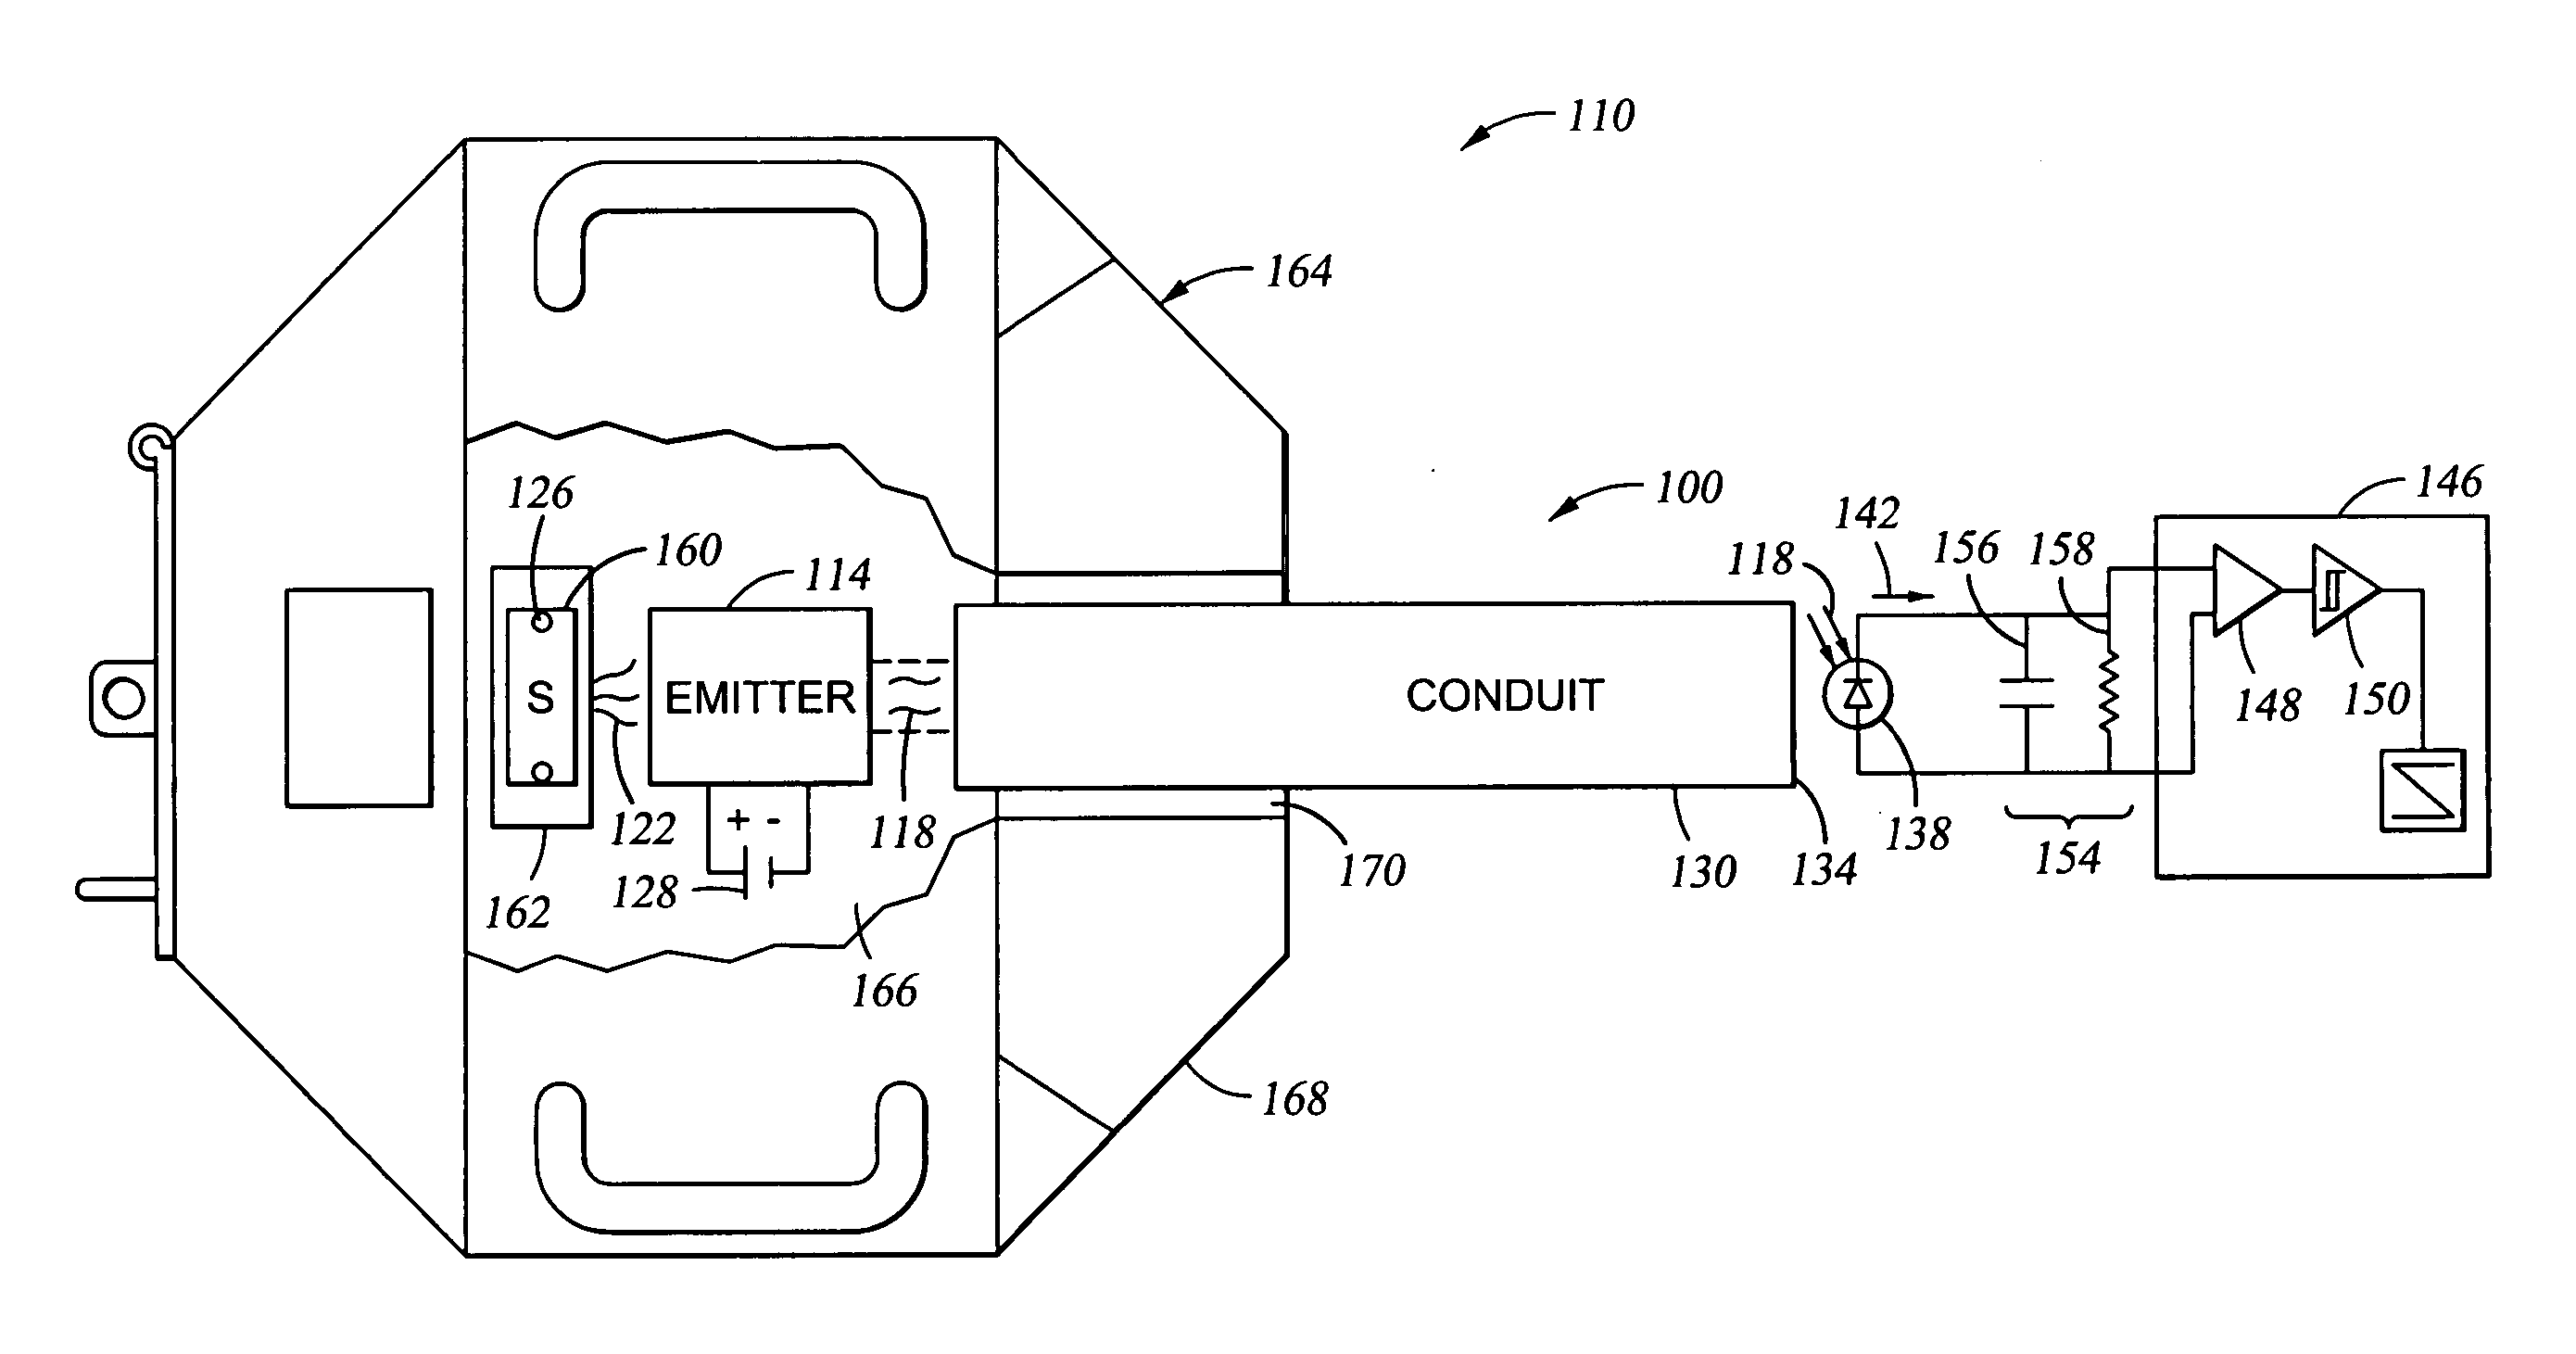 Radiation monitoring apparatus, systems, and methods